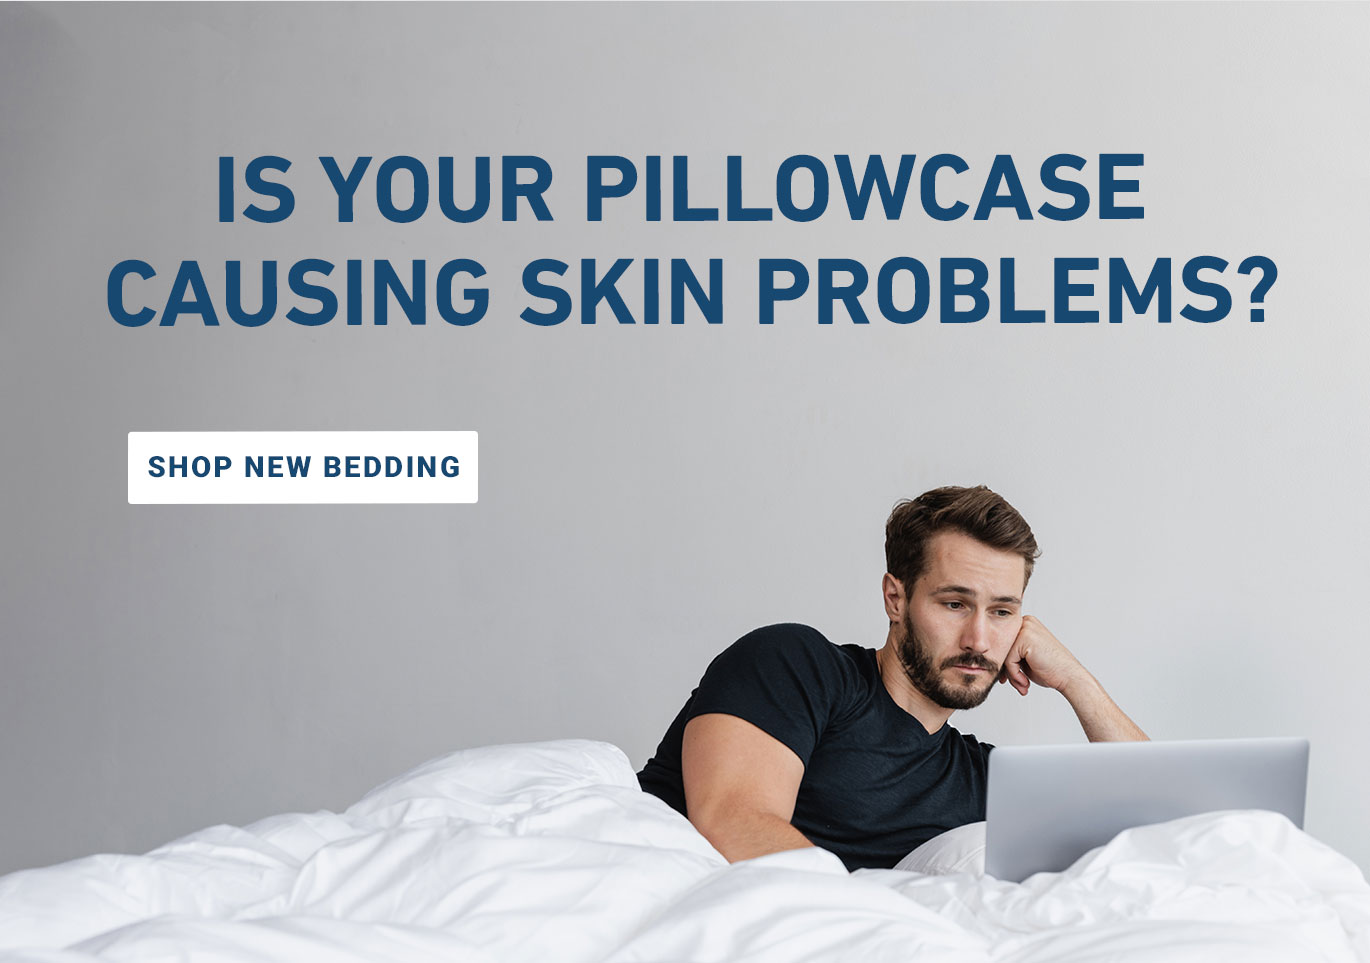 Is Your Pillowcase Causing Skin Problems?